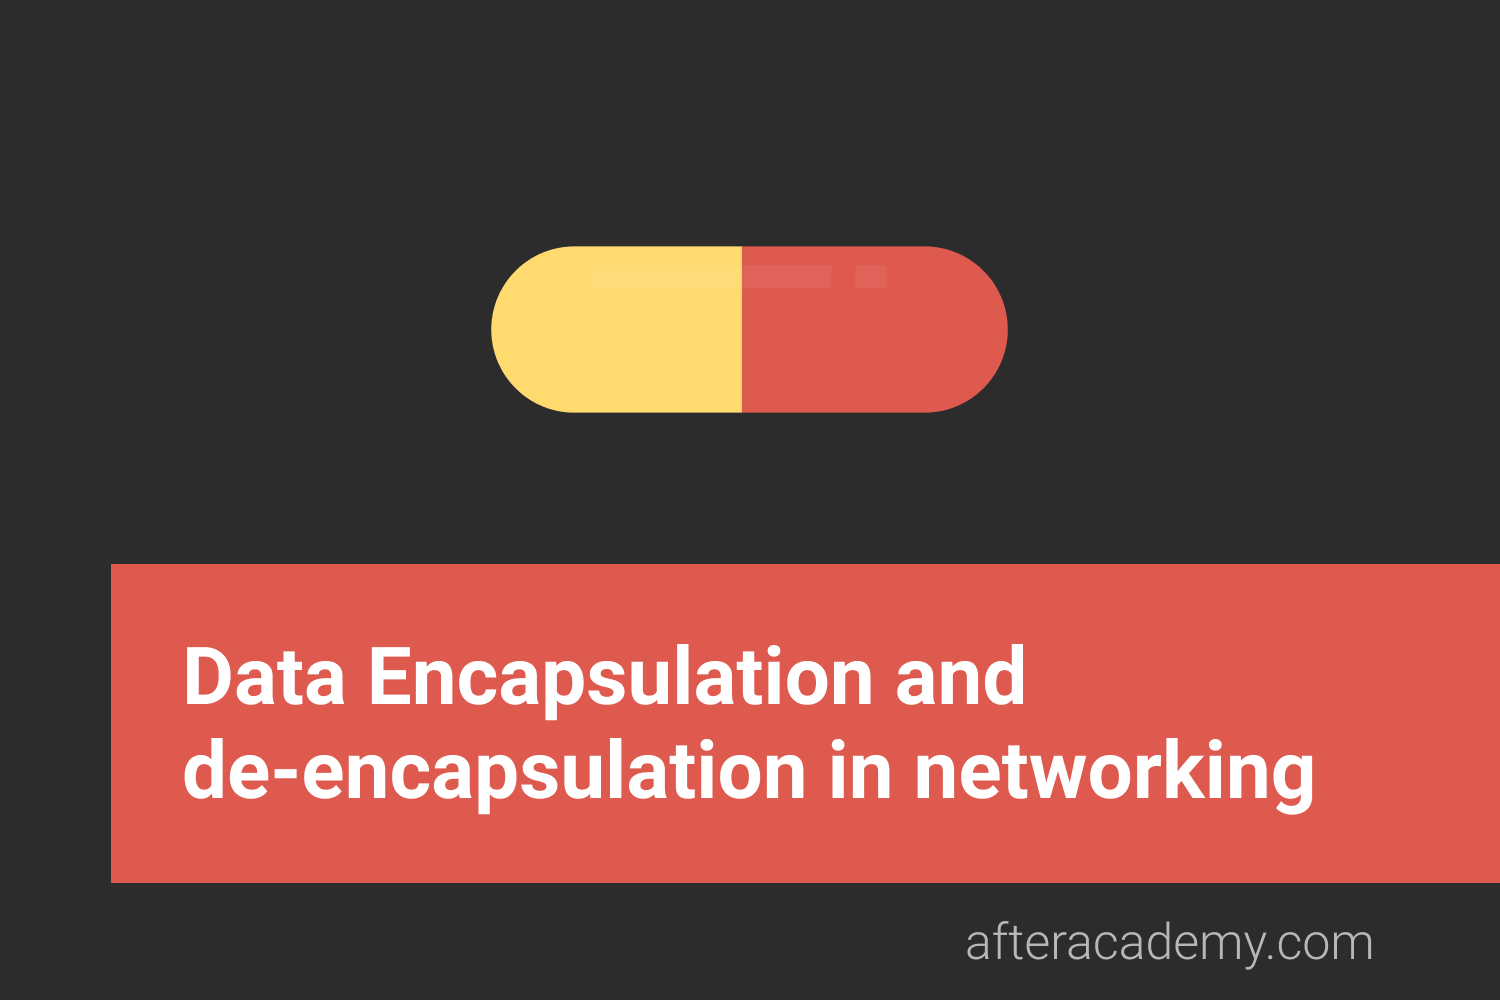 What is Data Encapsulation and de-encapsulation in networking?